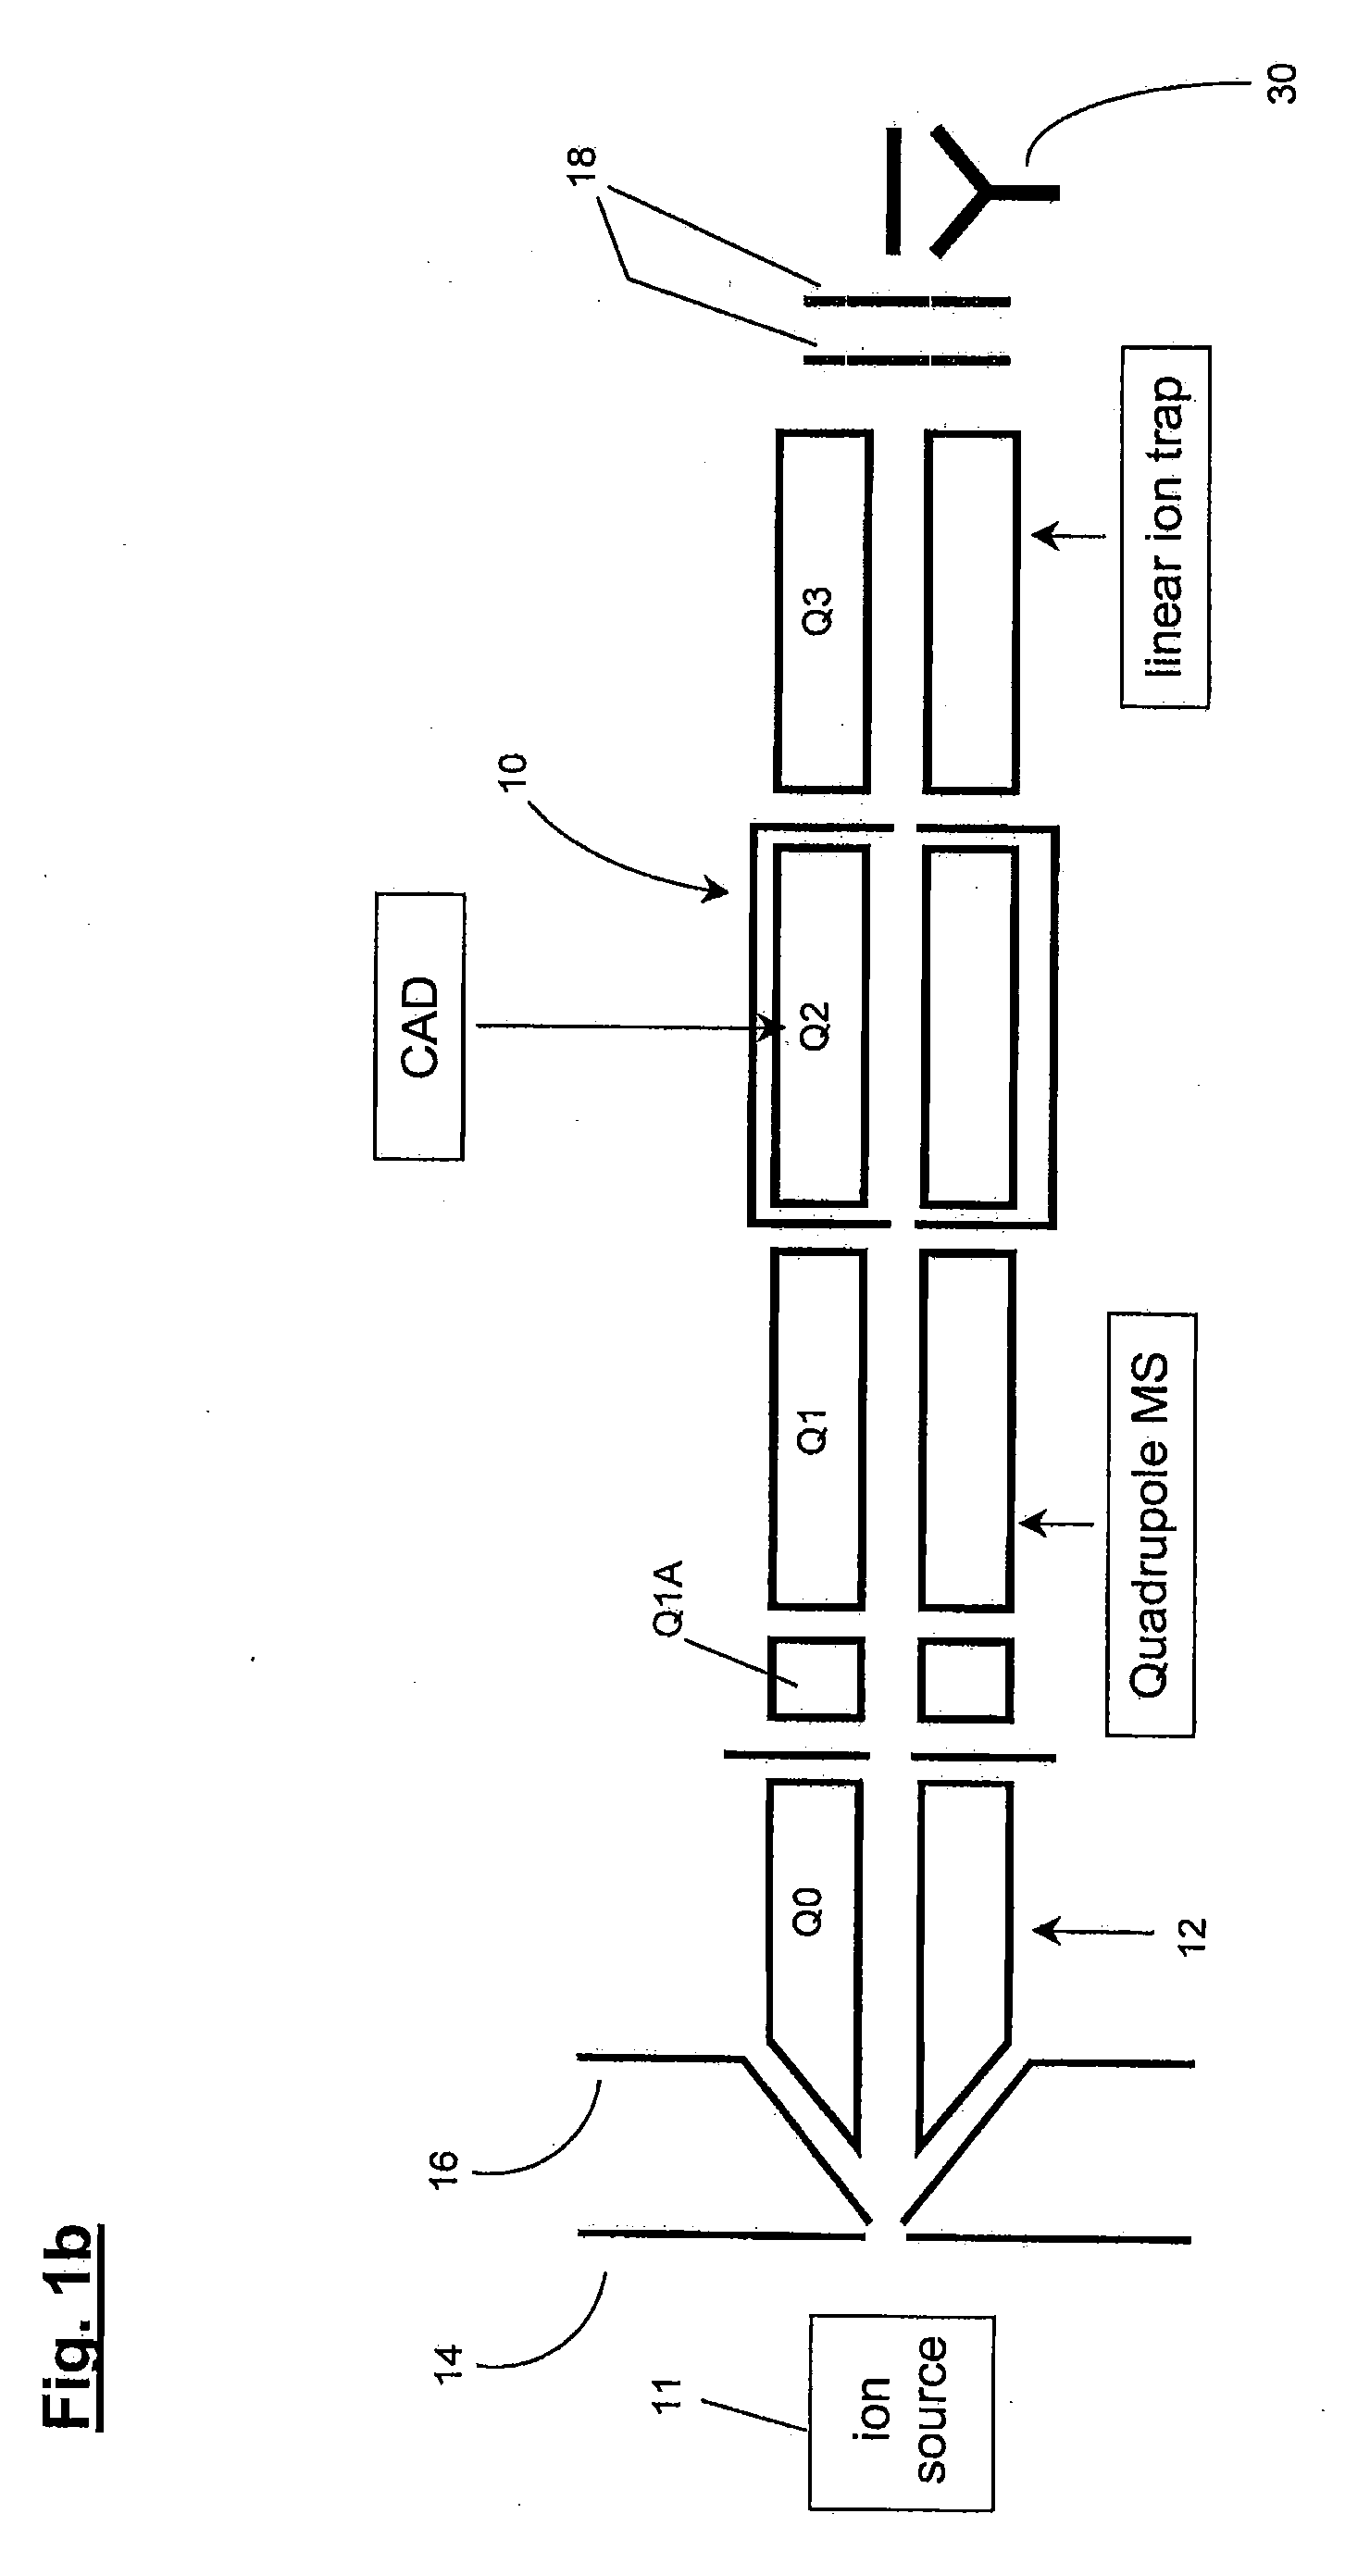 Method of operating a linear ion trap to provide low pressure short time high amplitude excitation with pulsed pressure